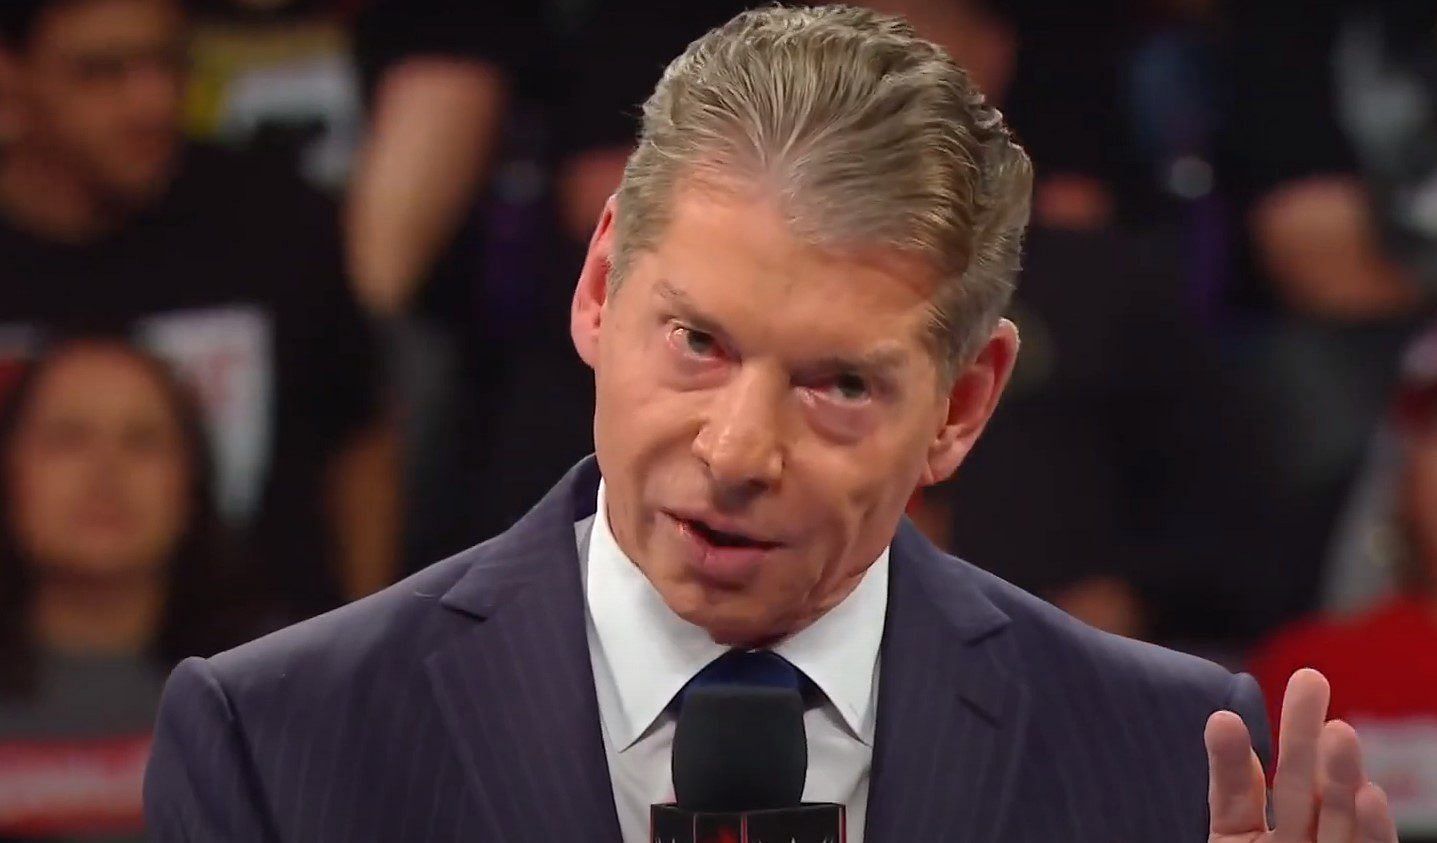 Vince McMahon put his foot down and didn't heed to the Dudley Boyz's request